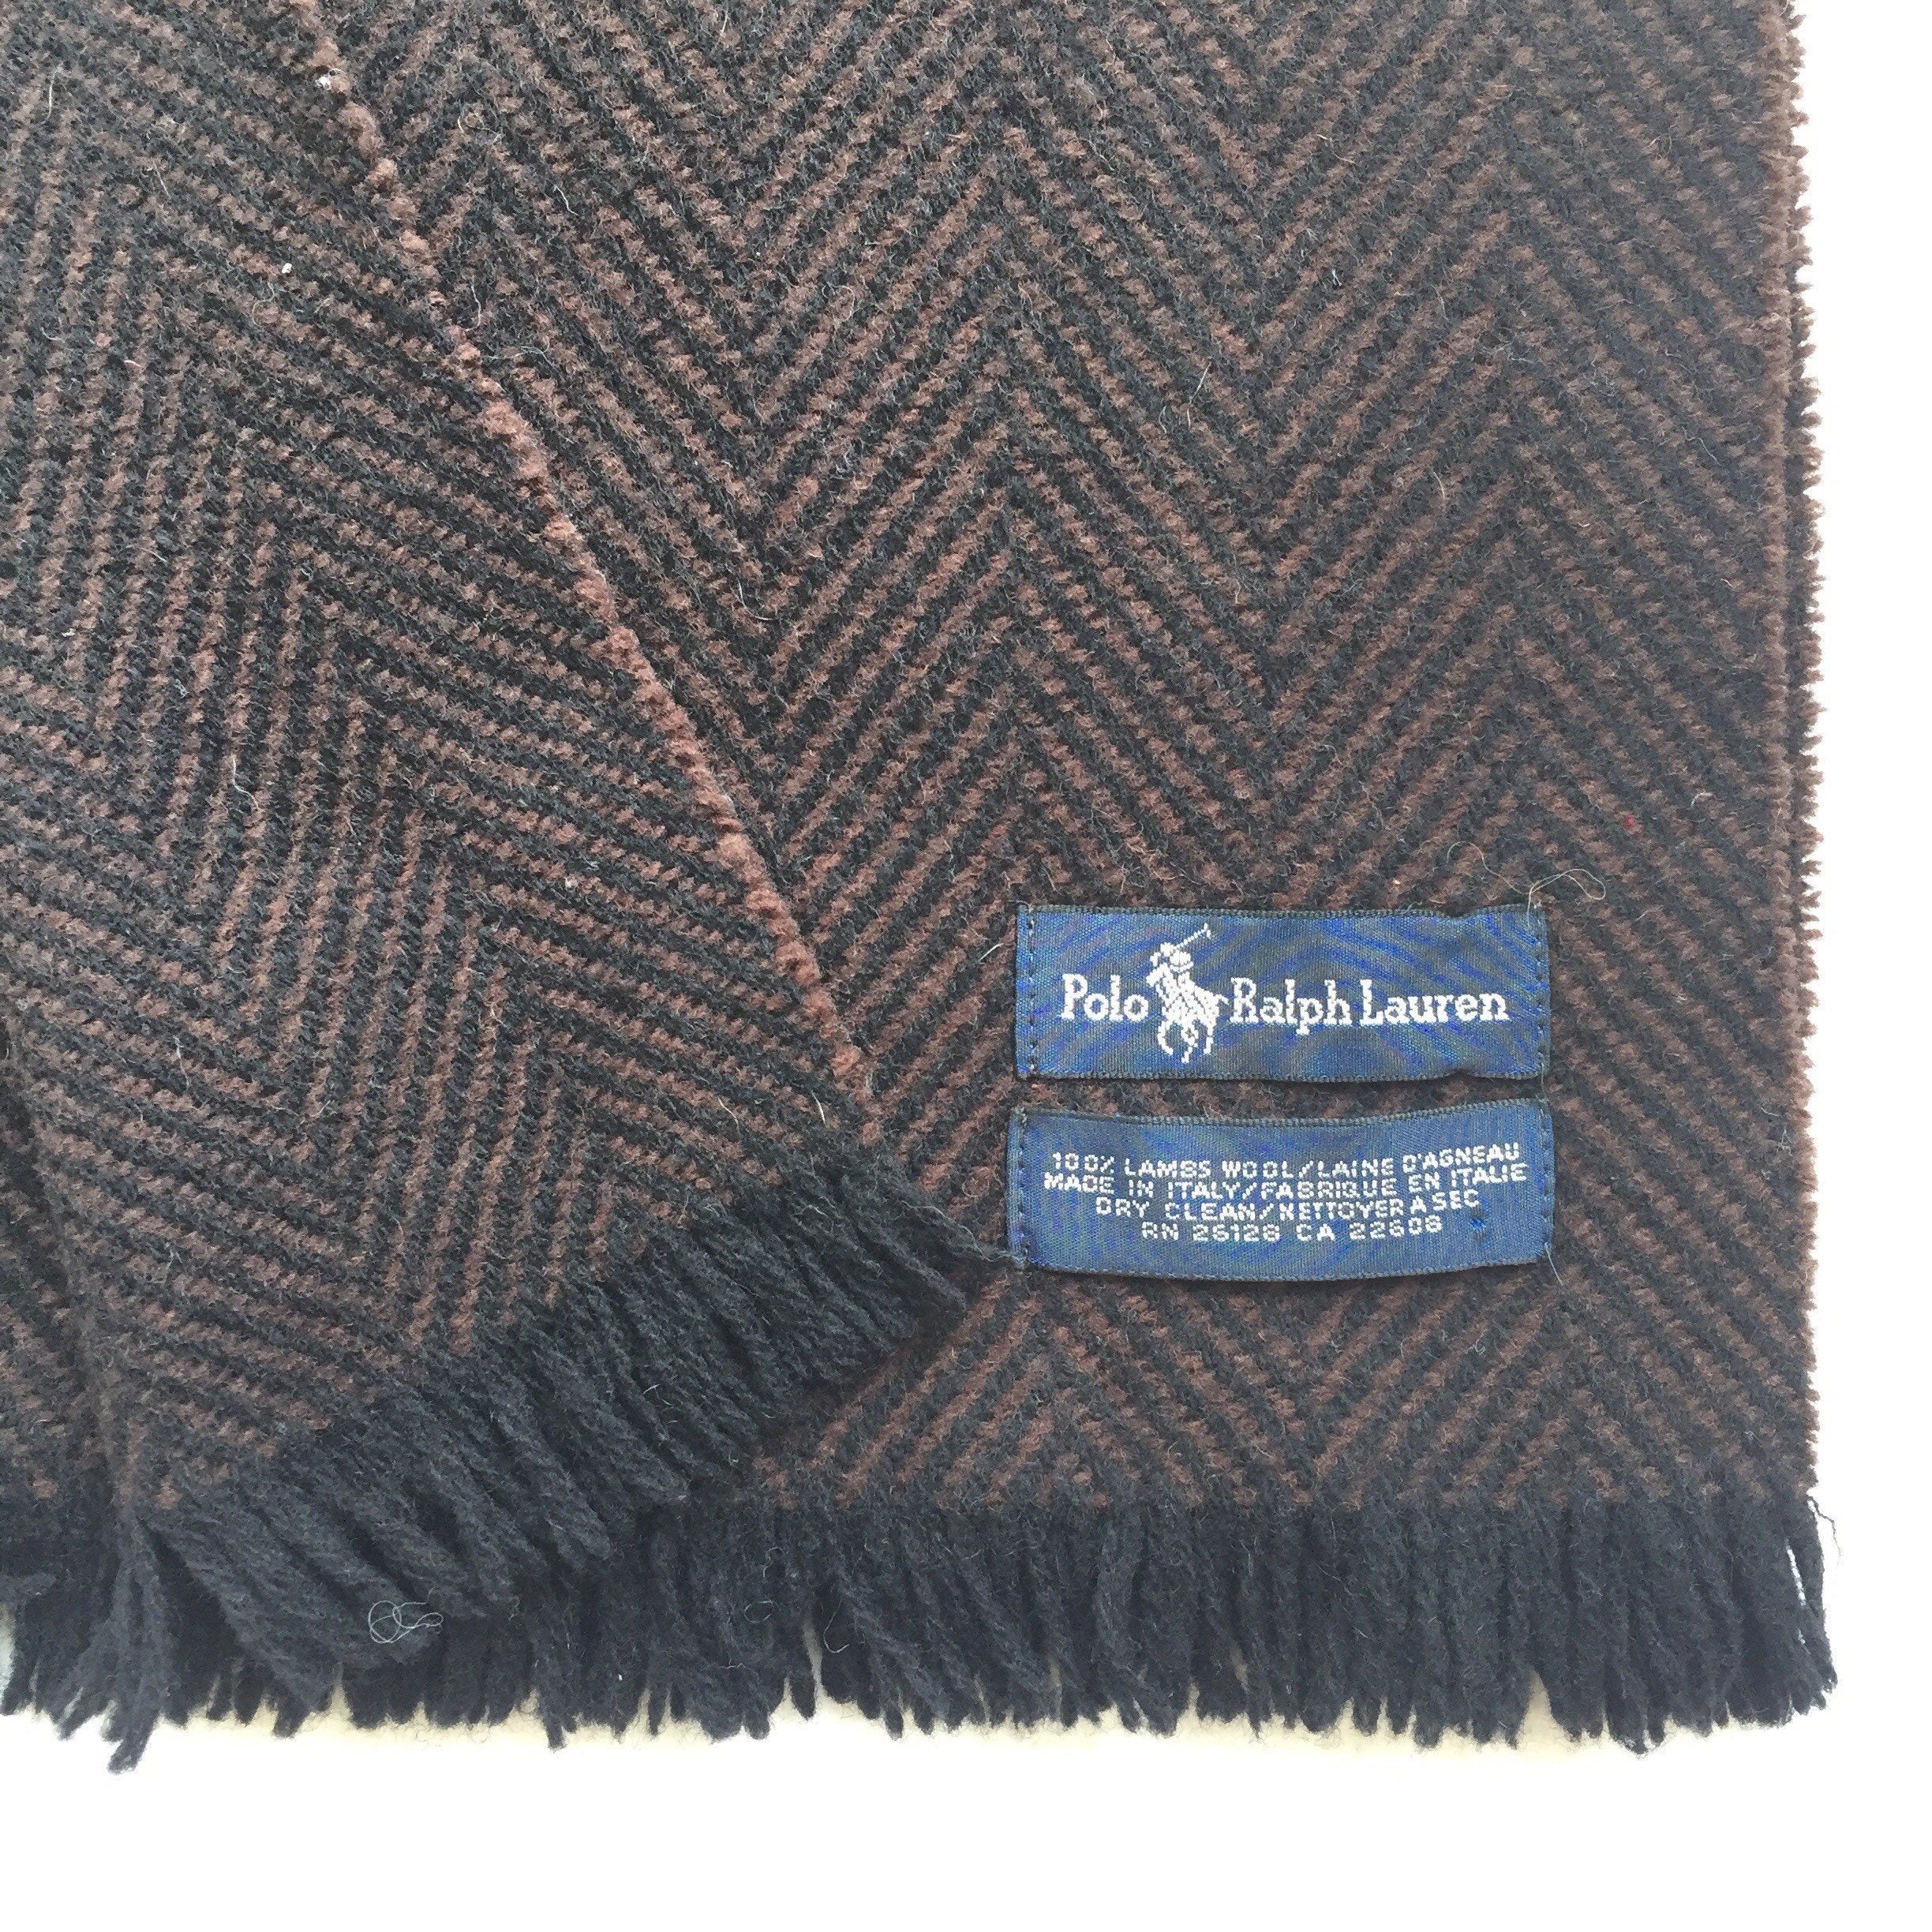 POLO RALPH LAUREN Muffler Pure Lambswool Zig Zag Plaid Design Dress up  Winter Style Pattern on Dark Brown Color Made in Scotland -  Israel